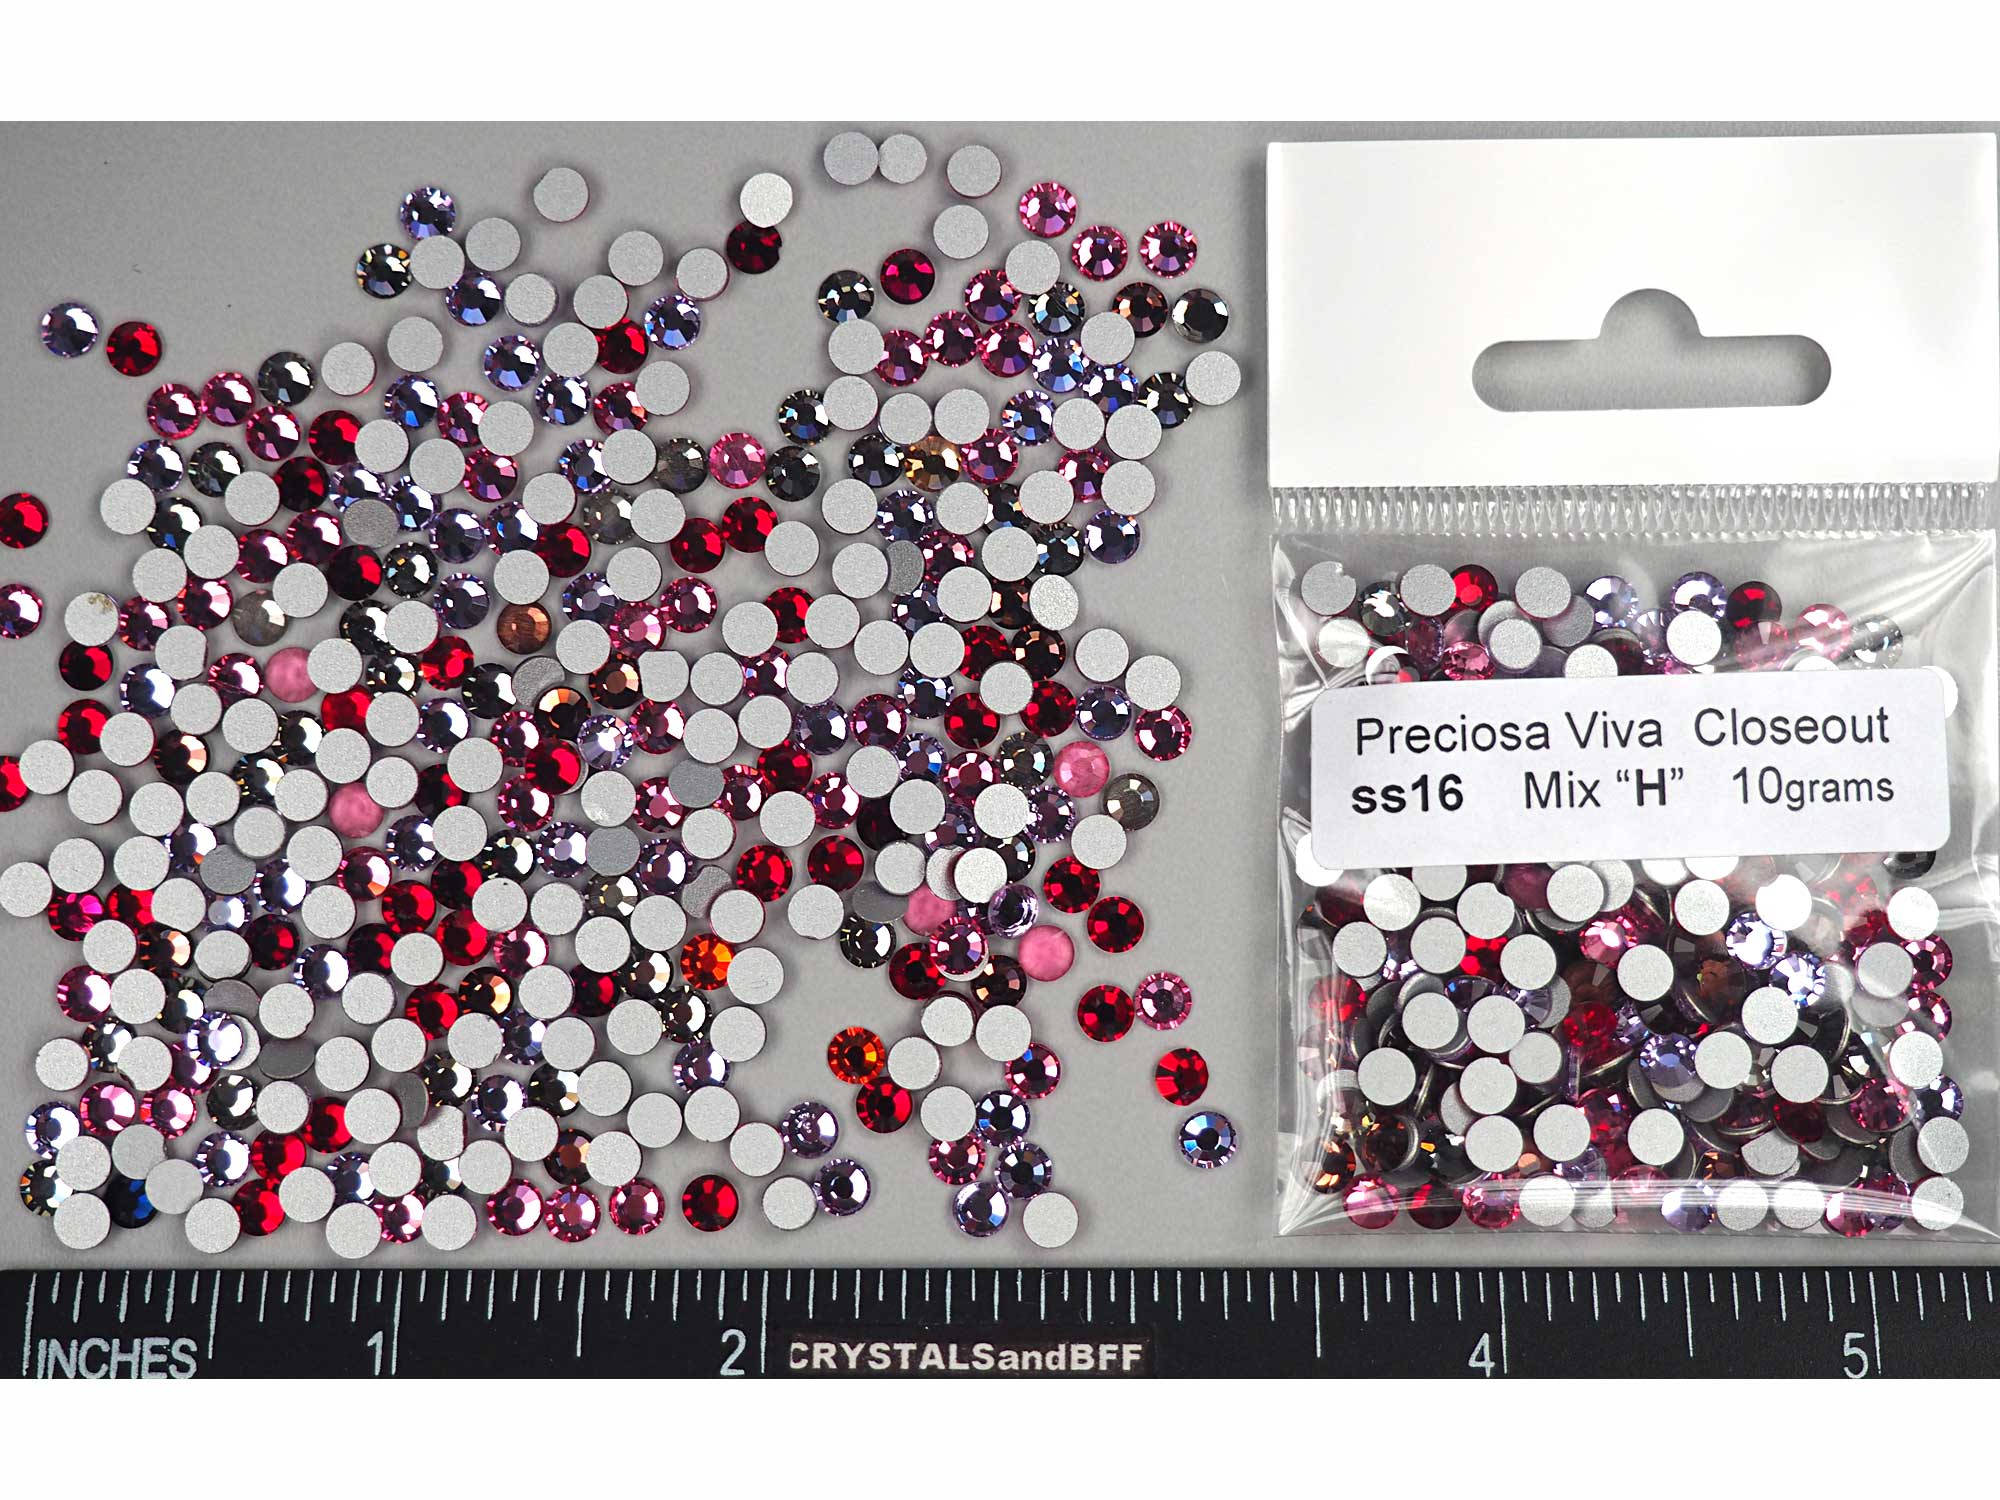 Mix Color "H" CLOSEOUT, ss16, 10grams of Preciosa VIVA Chaton Roses (Rhinestone Flatbacks), Genuine Czech Crystals, BY THE WEIGHT